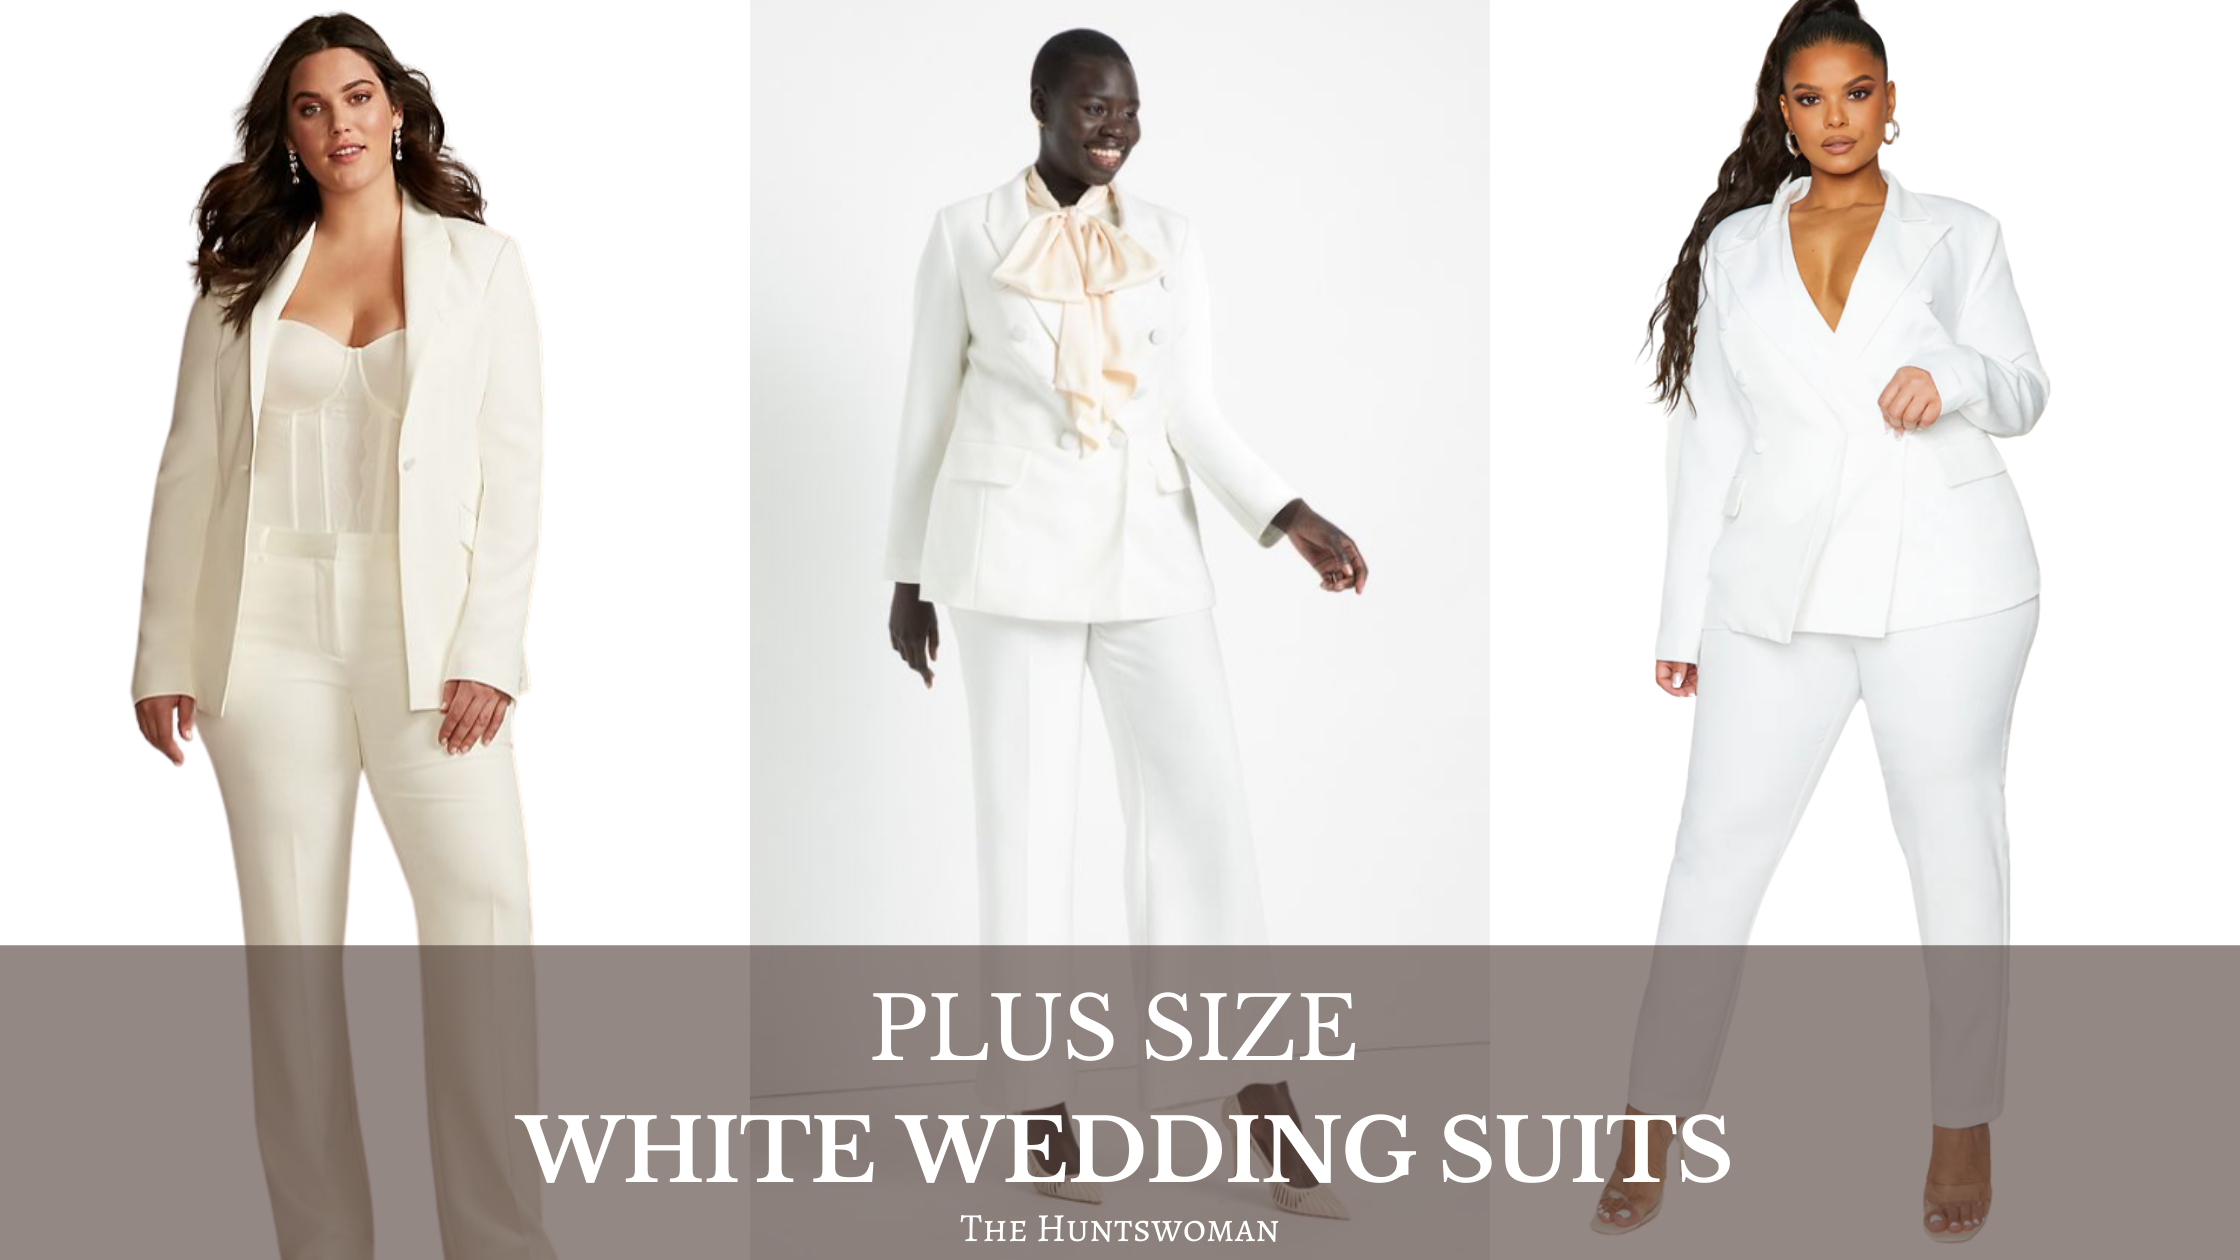 How Modern Brides Are Embracing the Wedding Suit